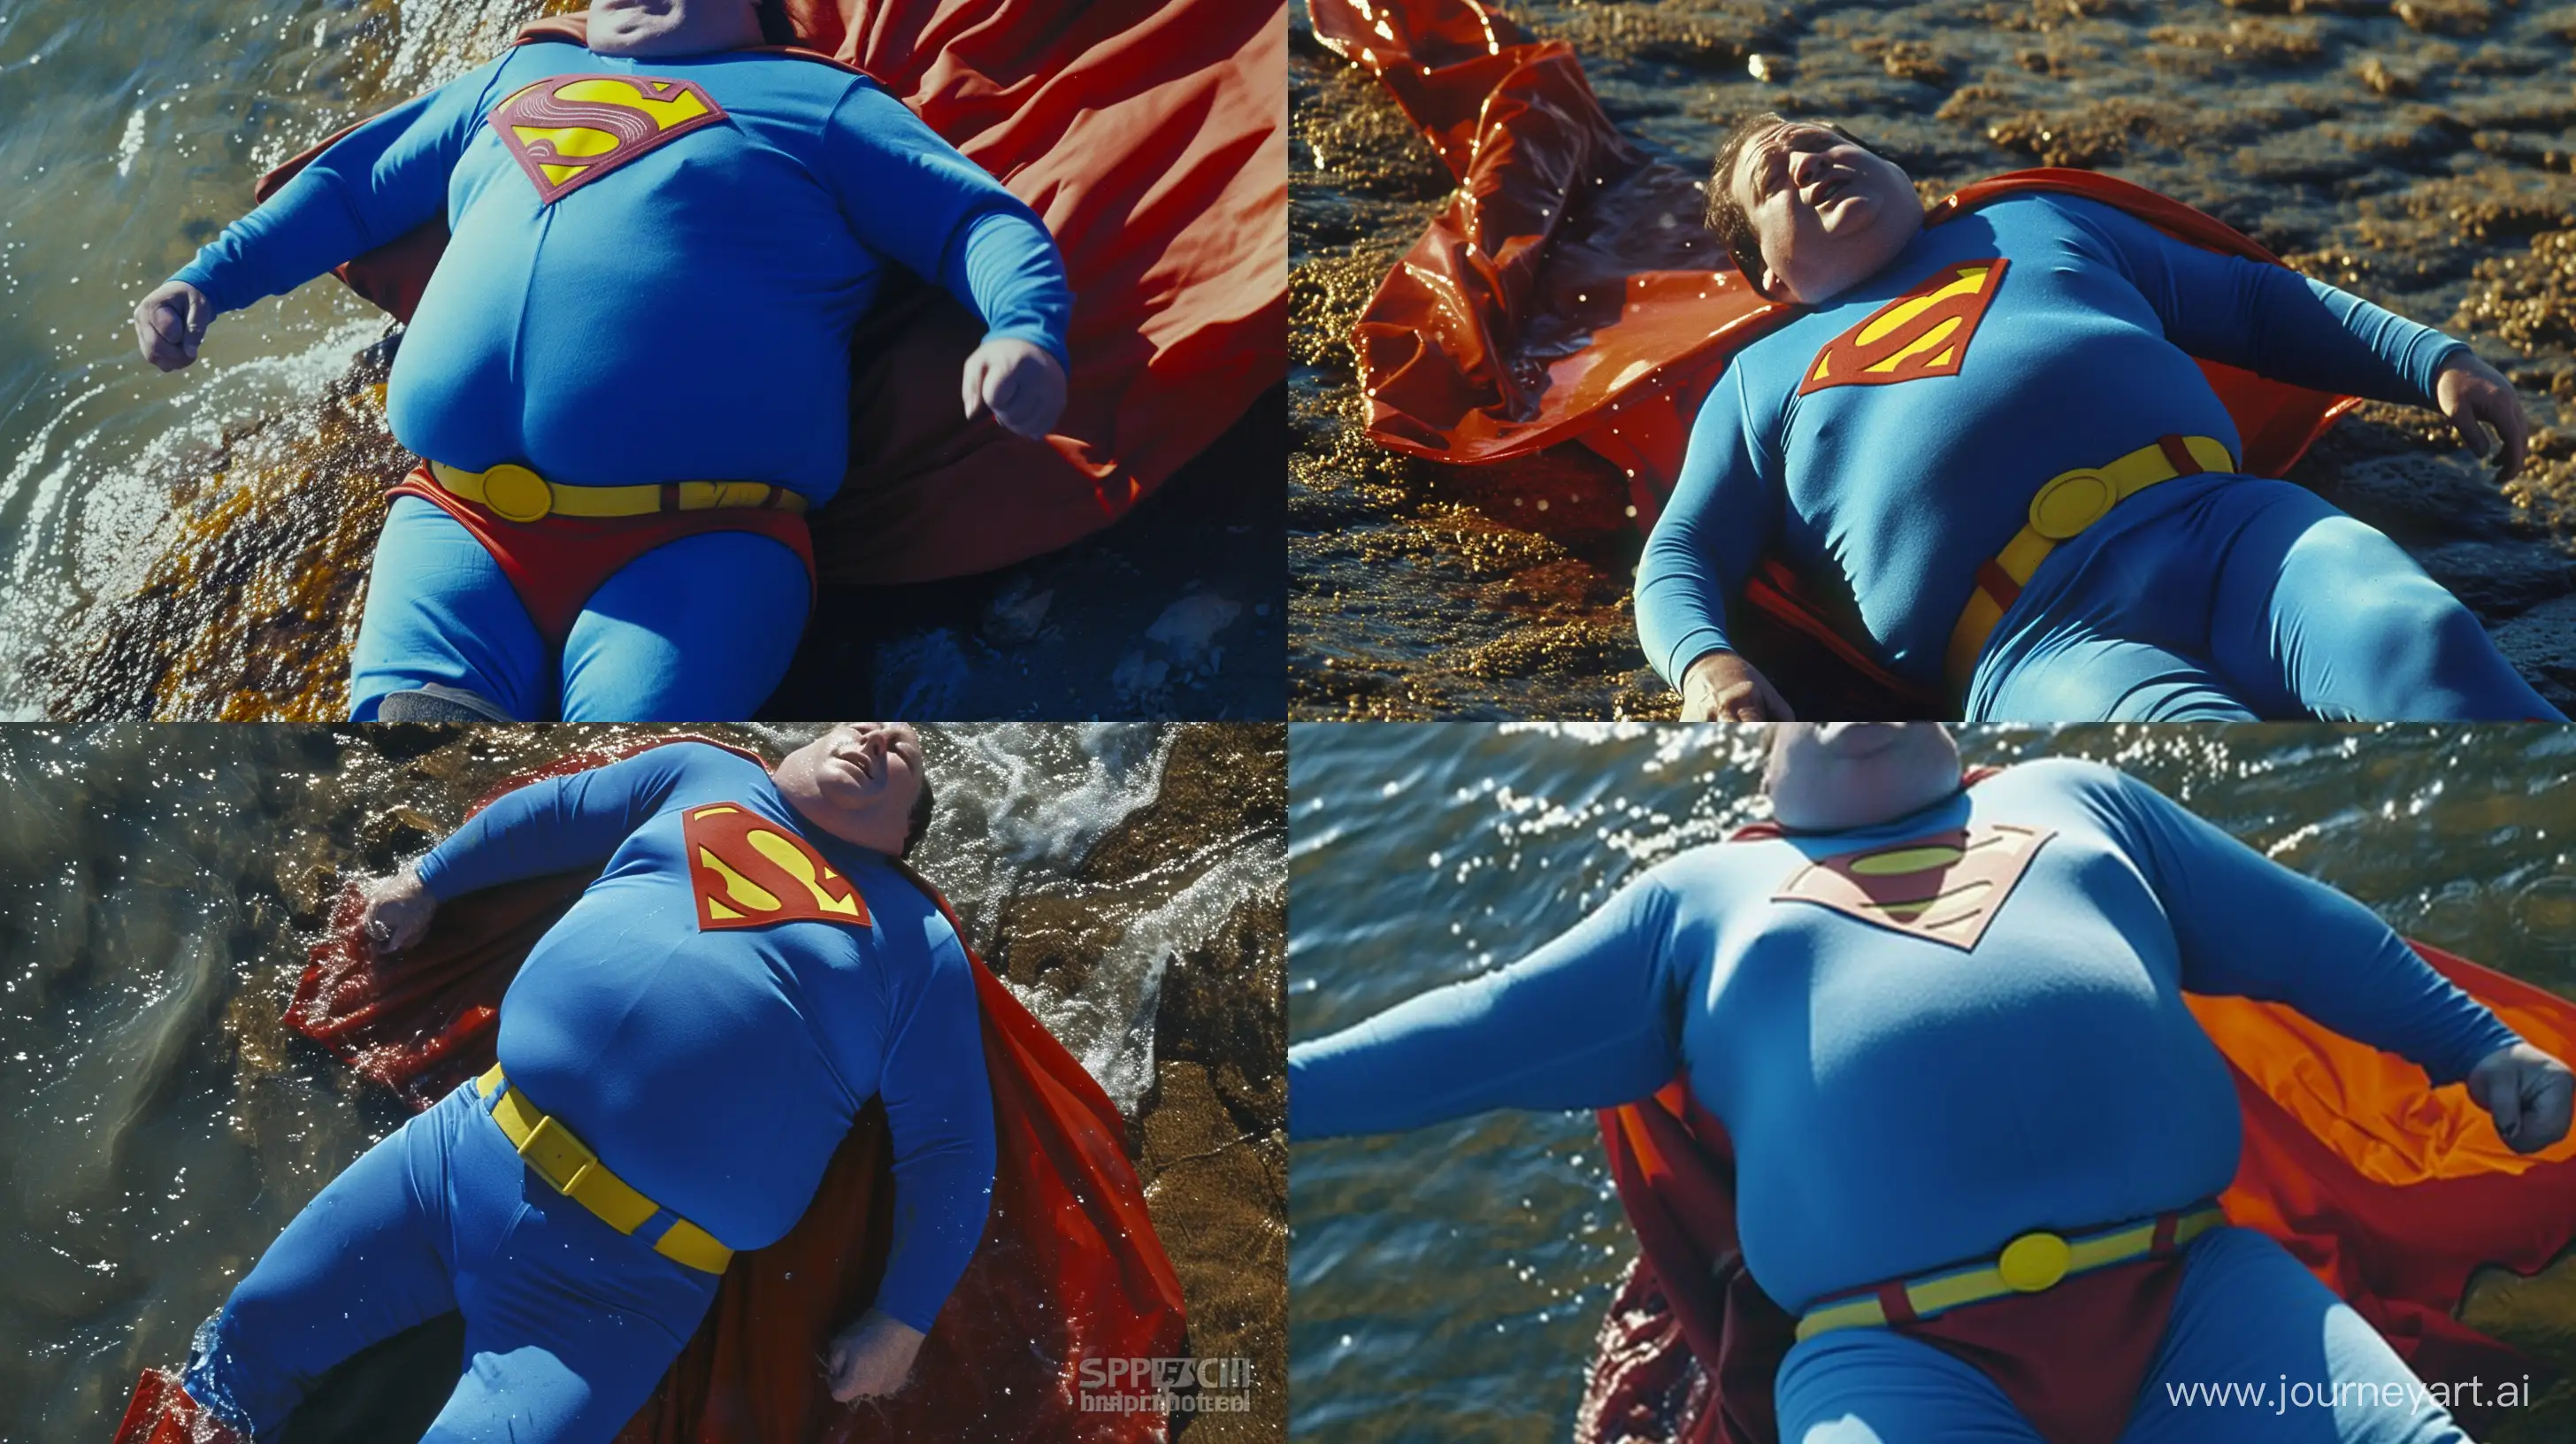 Anxious-Senior-Superman-Tumbles-Back-by-the-River